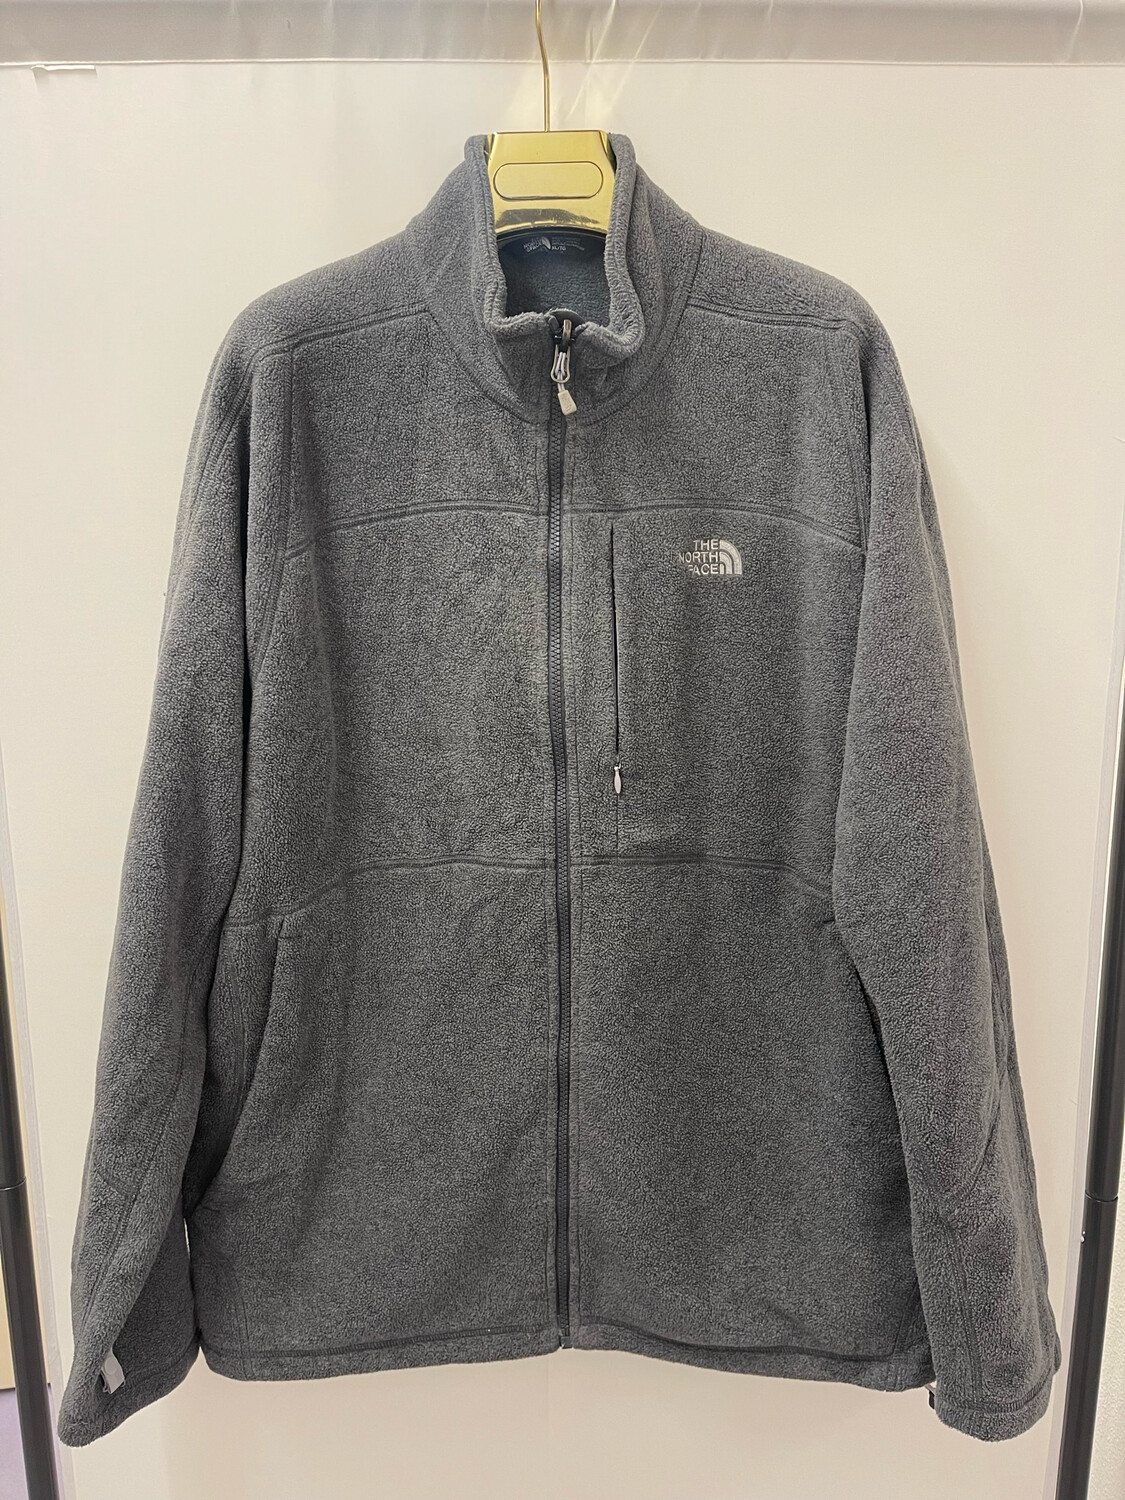 GIACCA PILE THE NORTH FACE GRIGIO